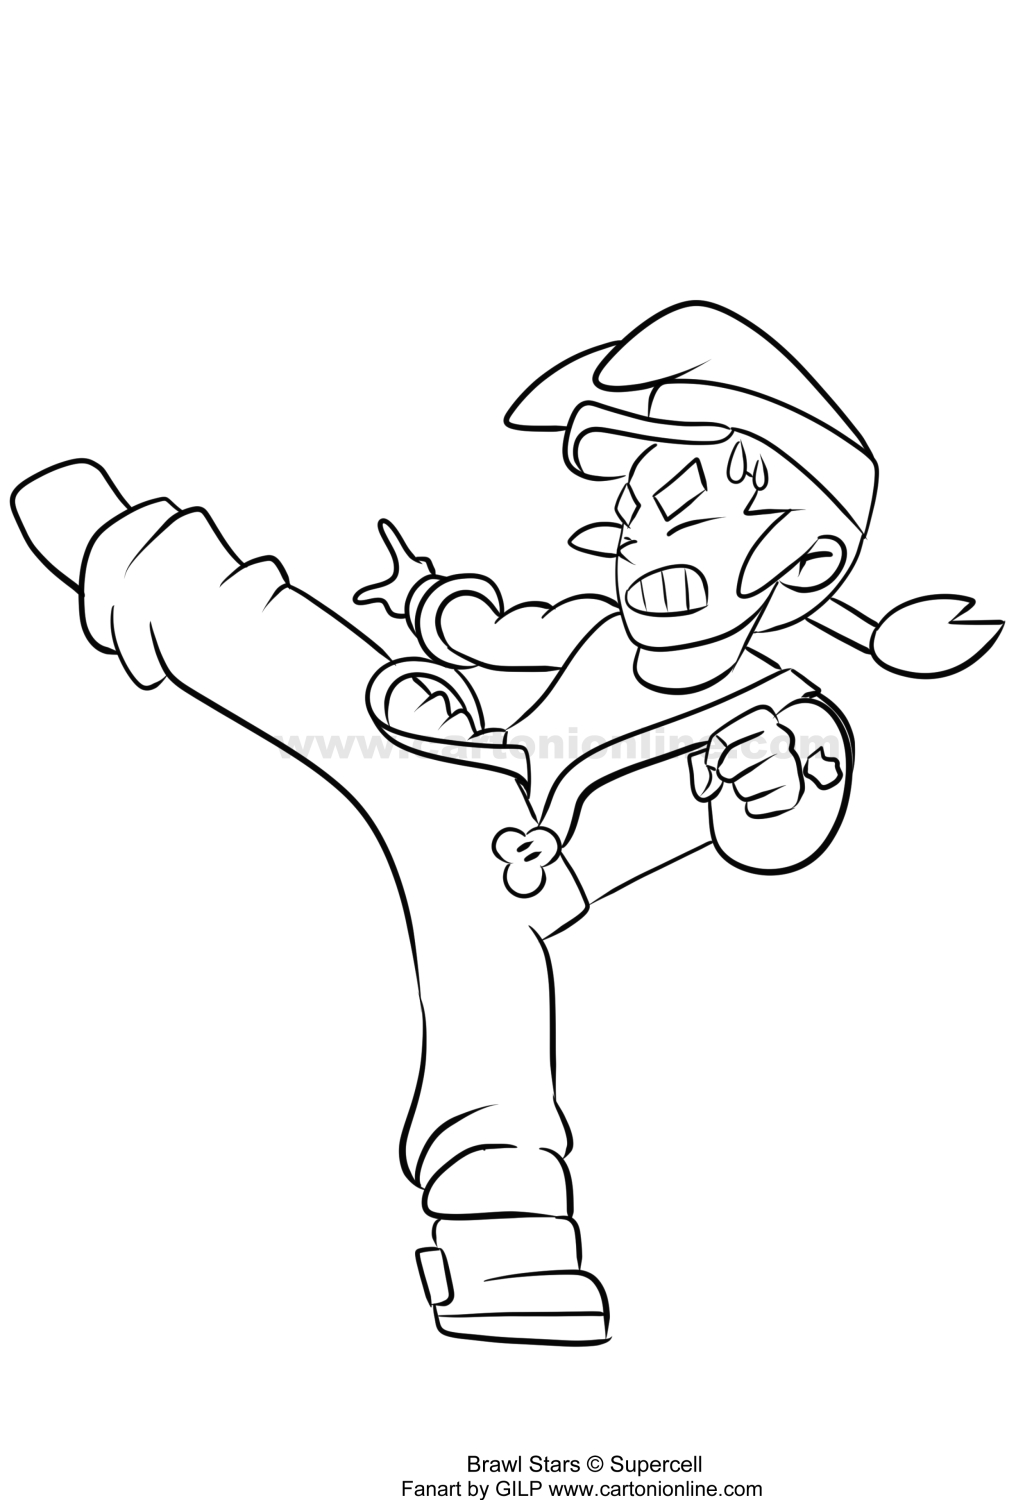 Fang 06 from Brawl Stars coloring pages to print and coloring